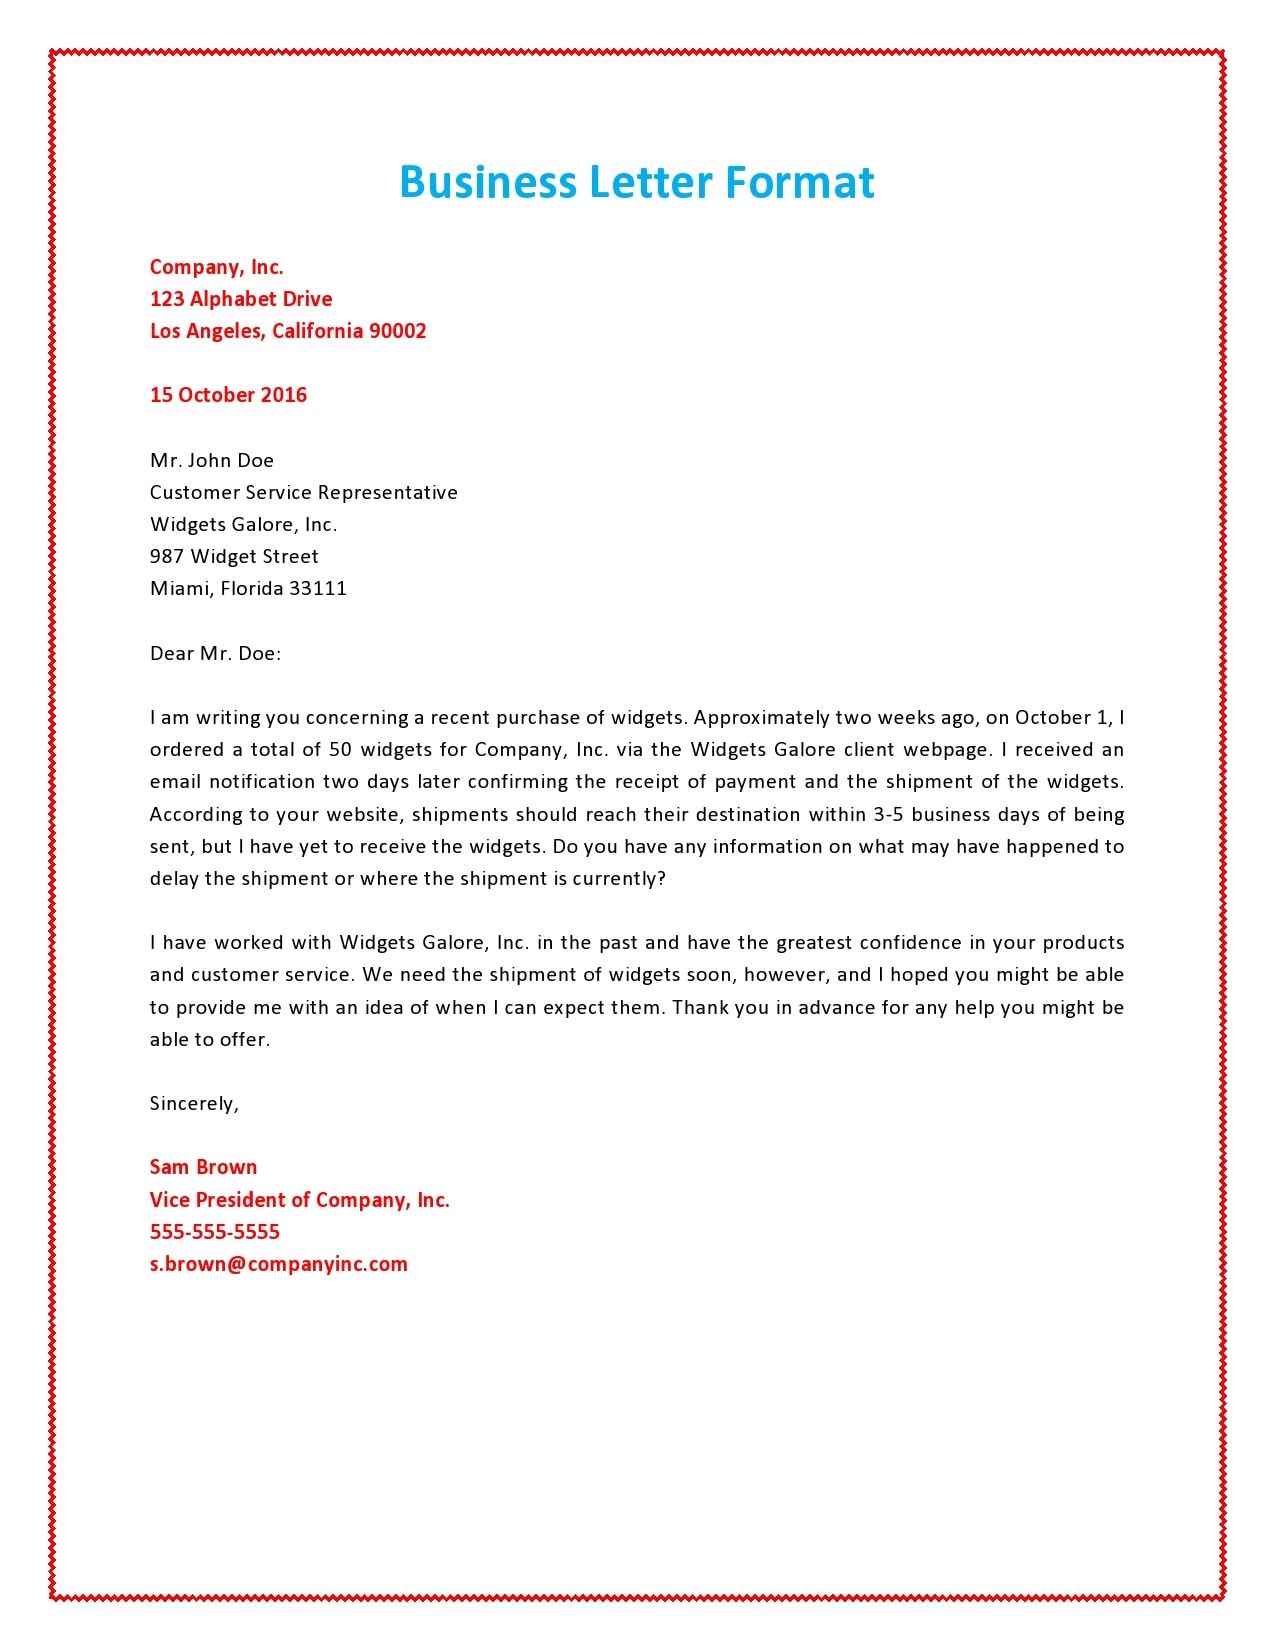 24 Professional Business Letter Templates [Word] Throughout Microsoft Word Business Letter Template